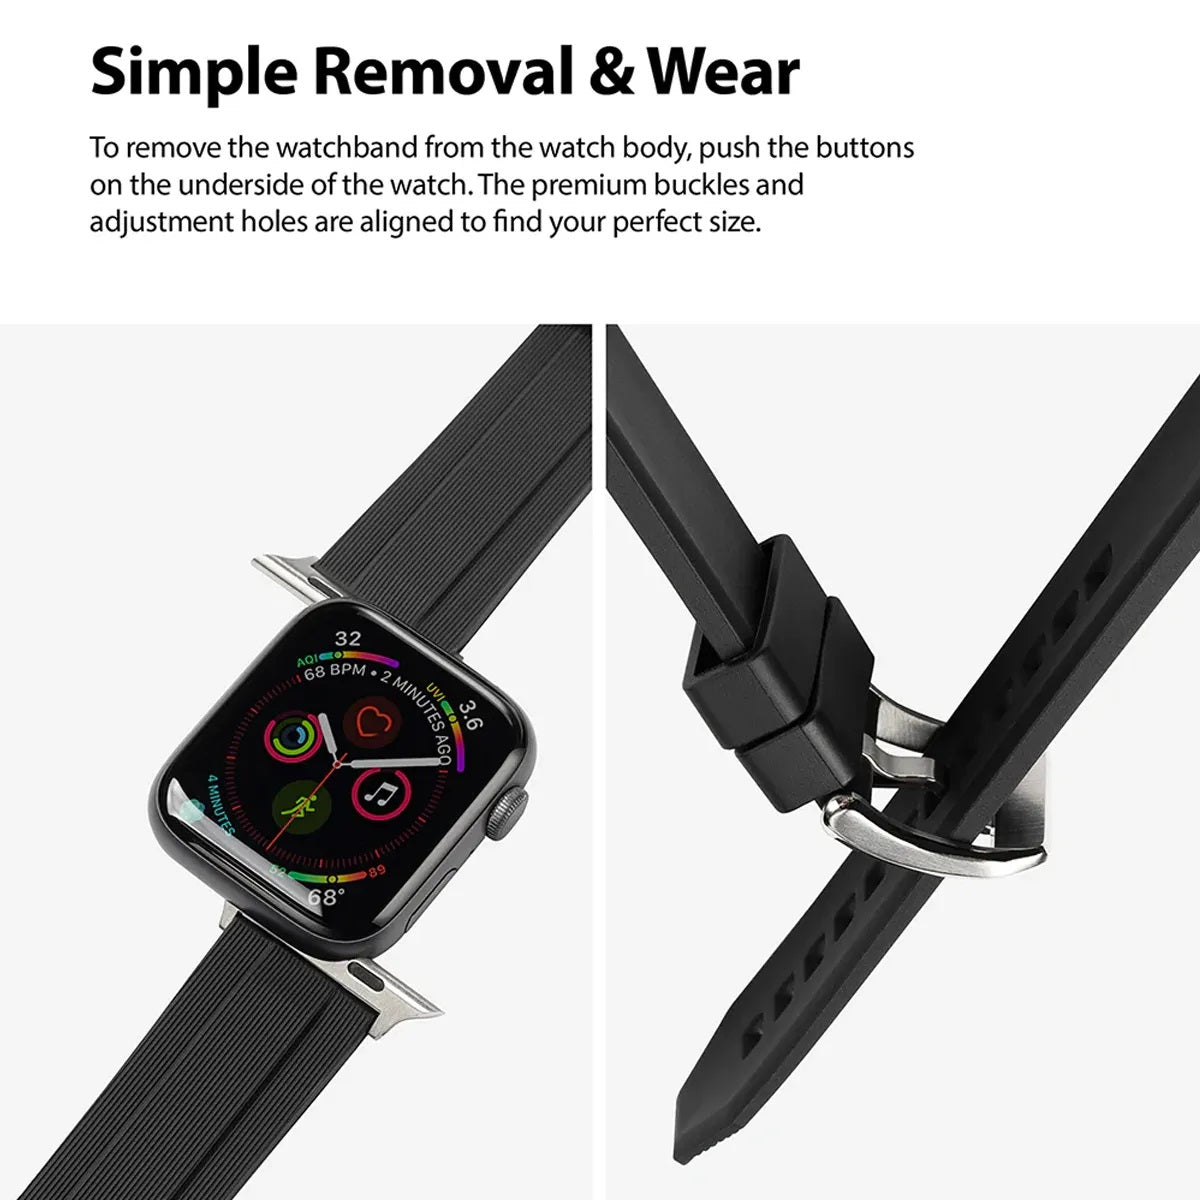 Ringke Rubber One Apple Watch Band for 38/40/41mm